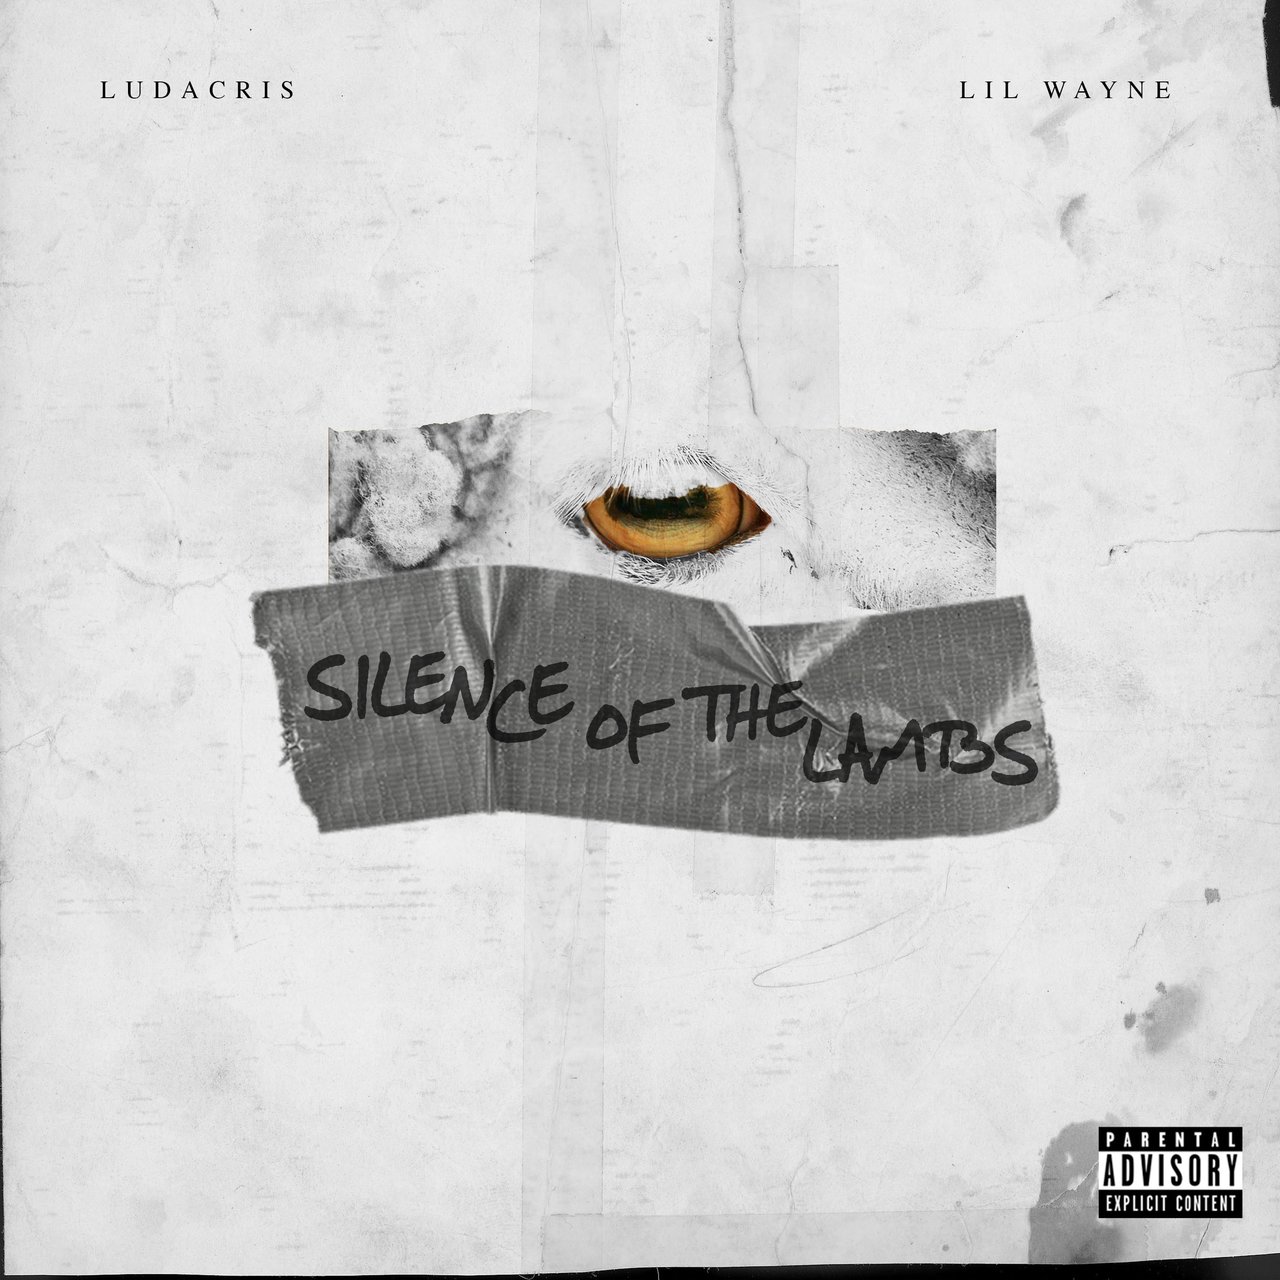 Ludacris - S.O.T.L. (Silence Of The Lambs) (ft. Lil Wayne) (Cover)